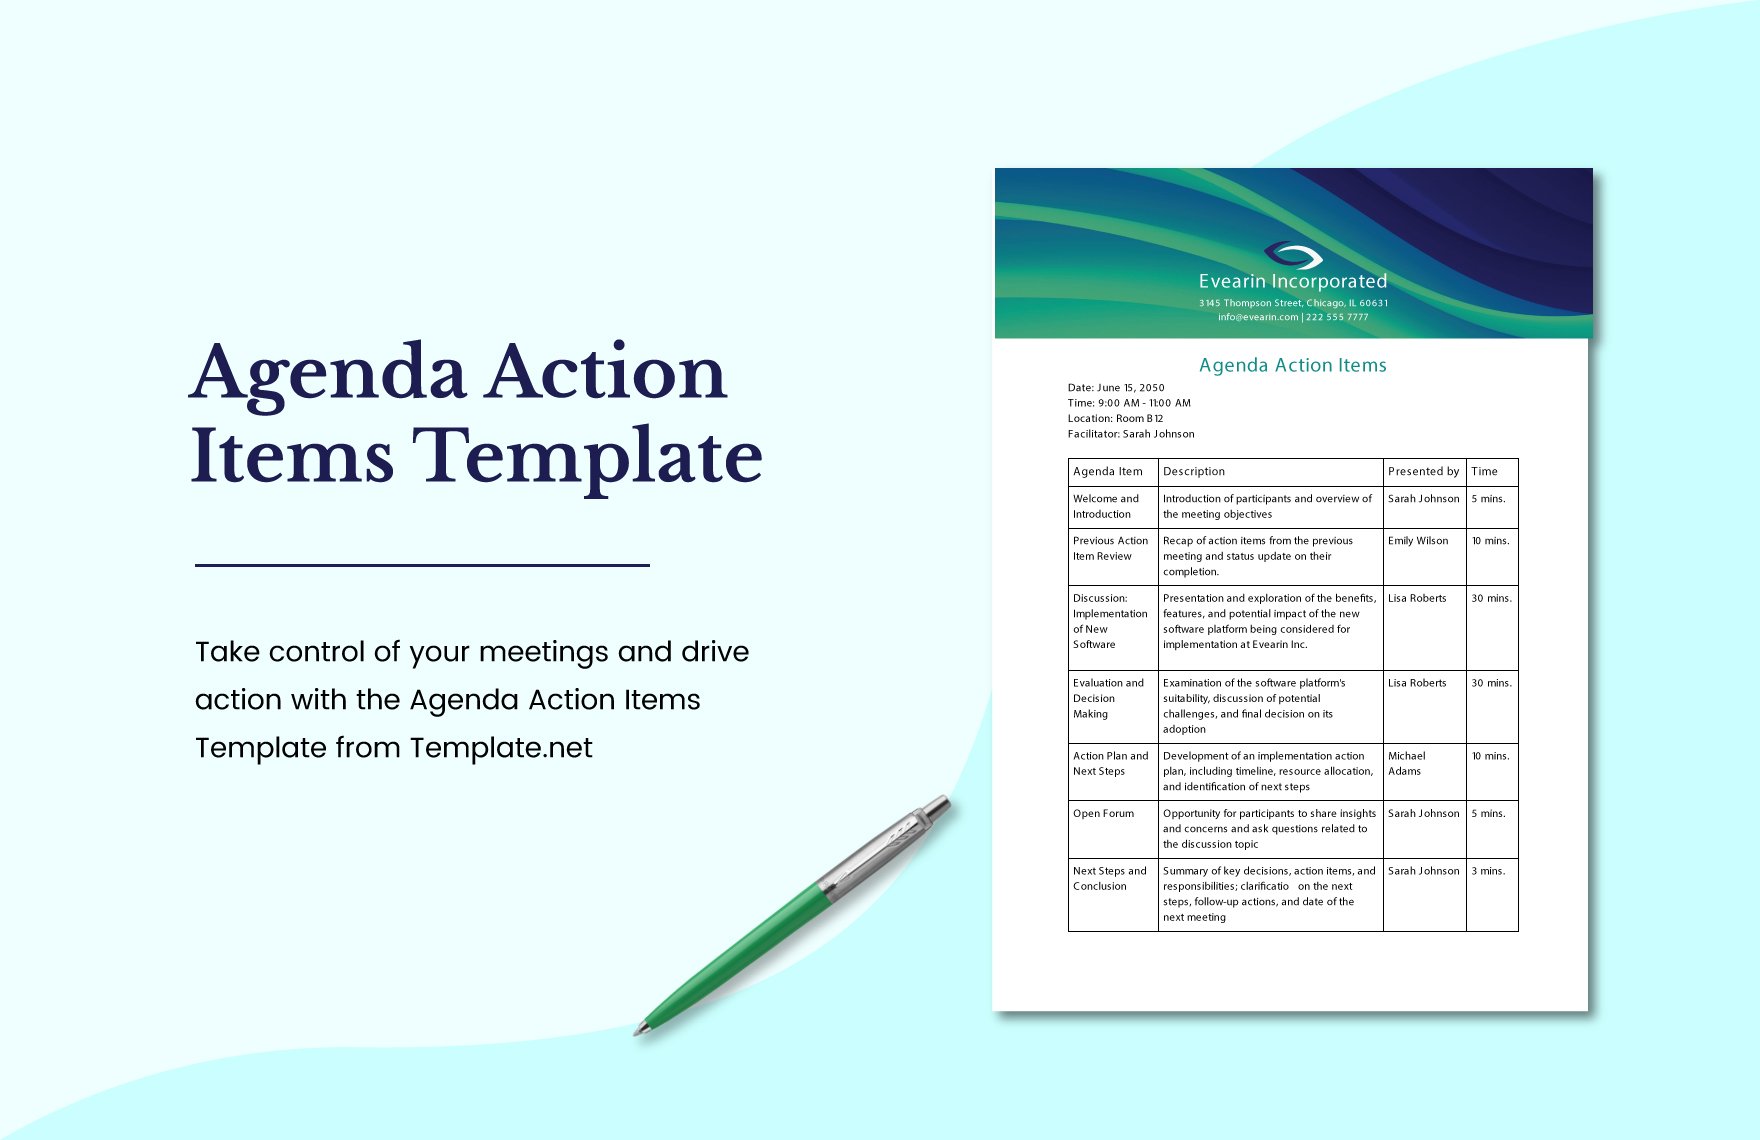 Agenda Action Items Template